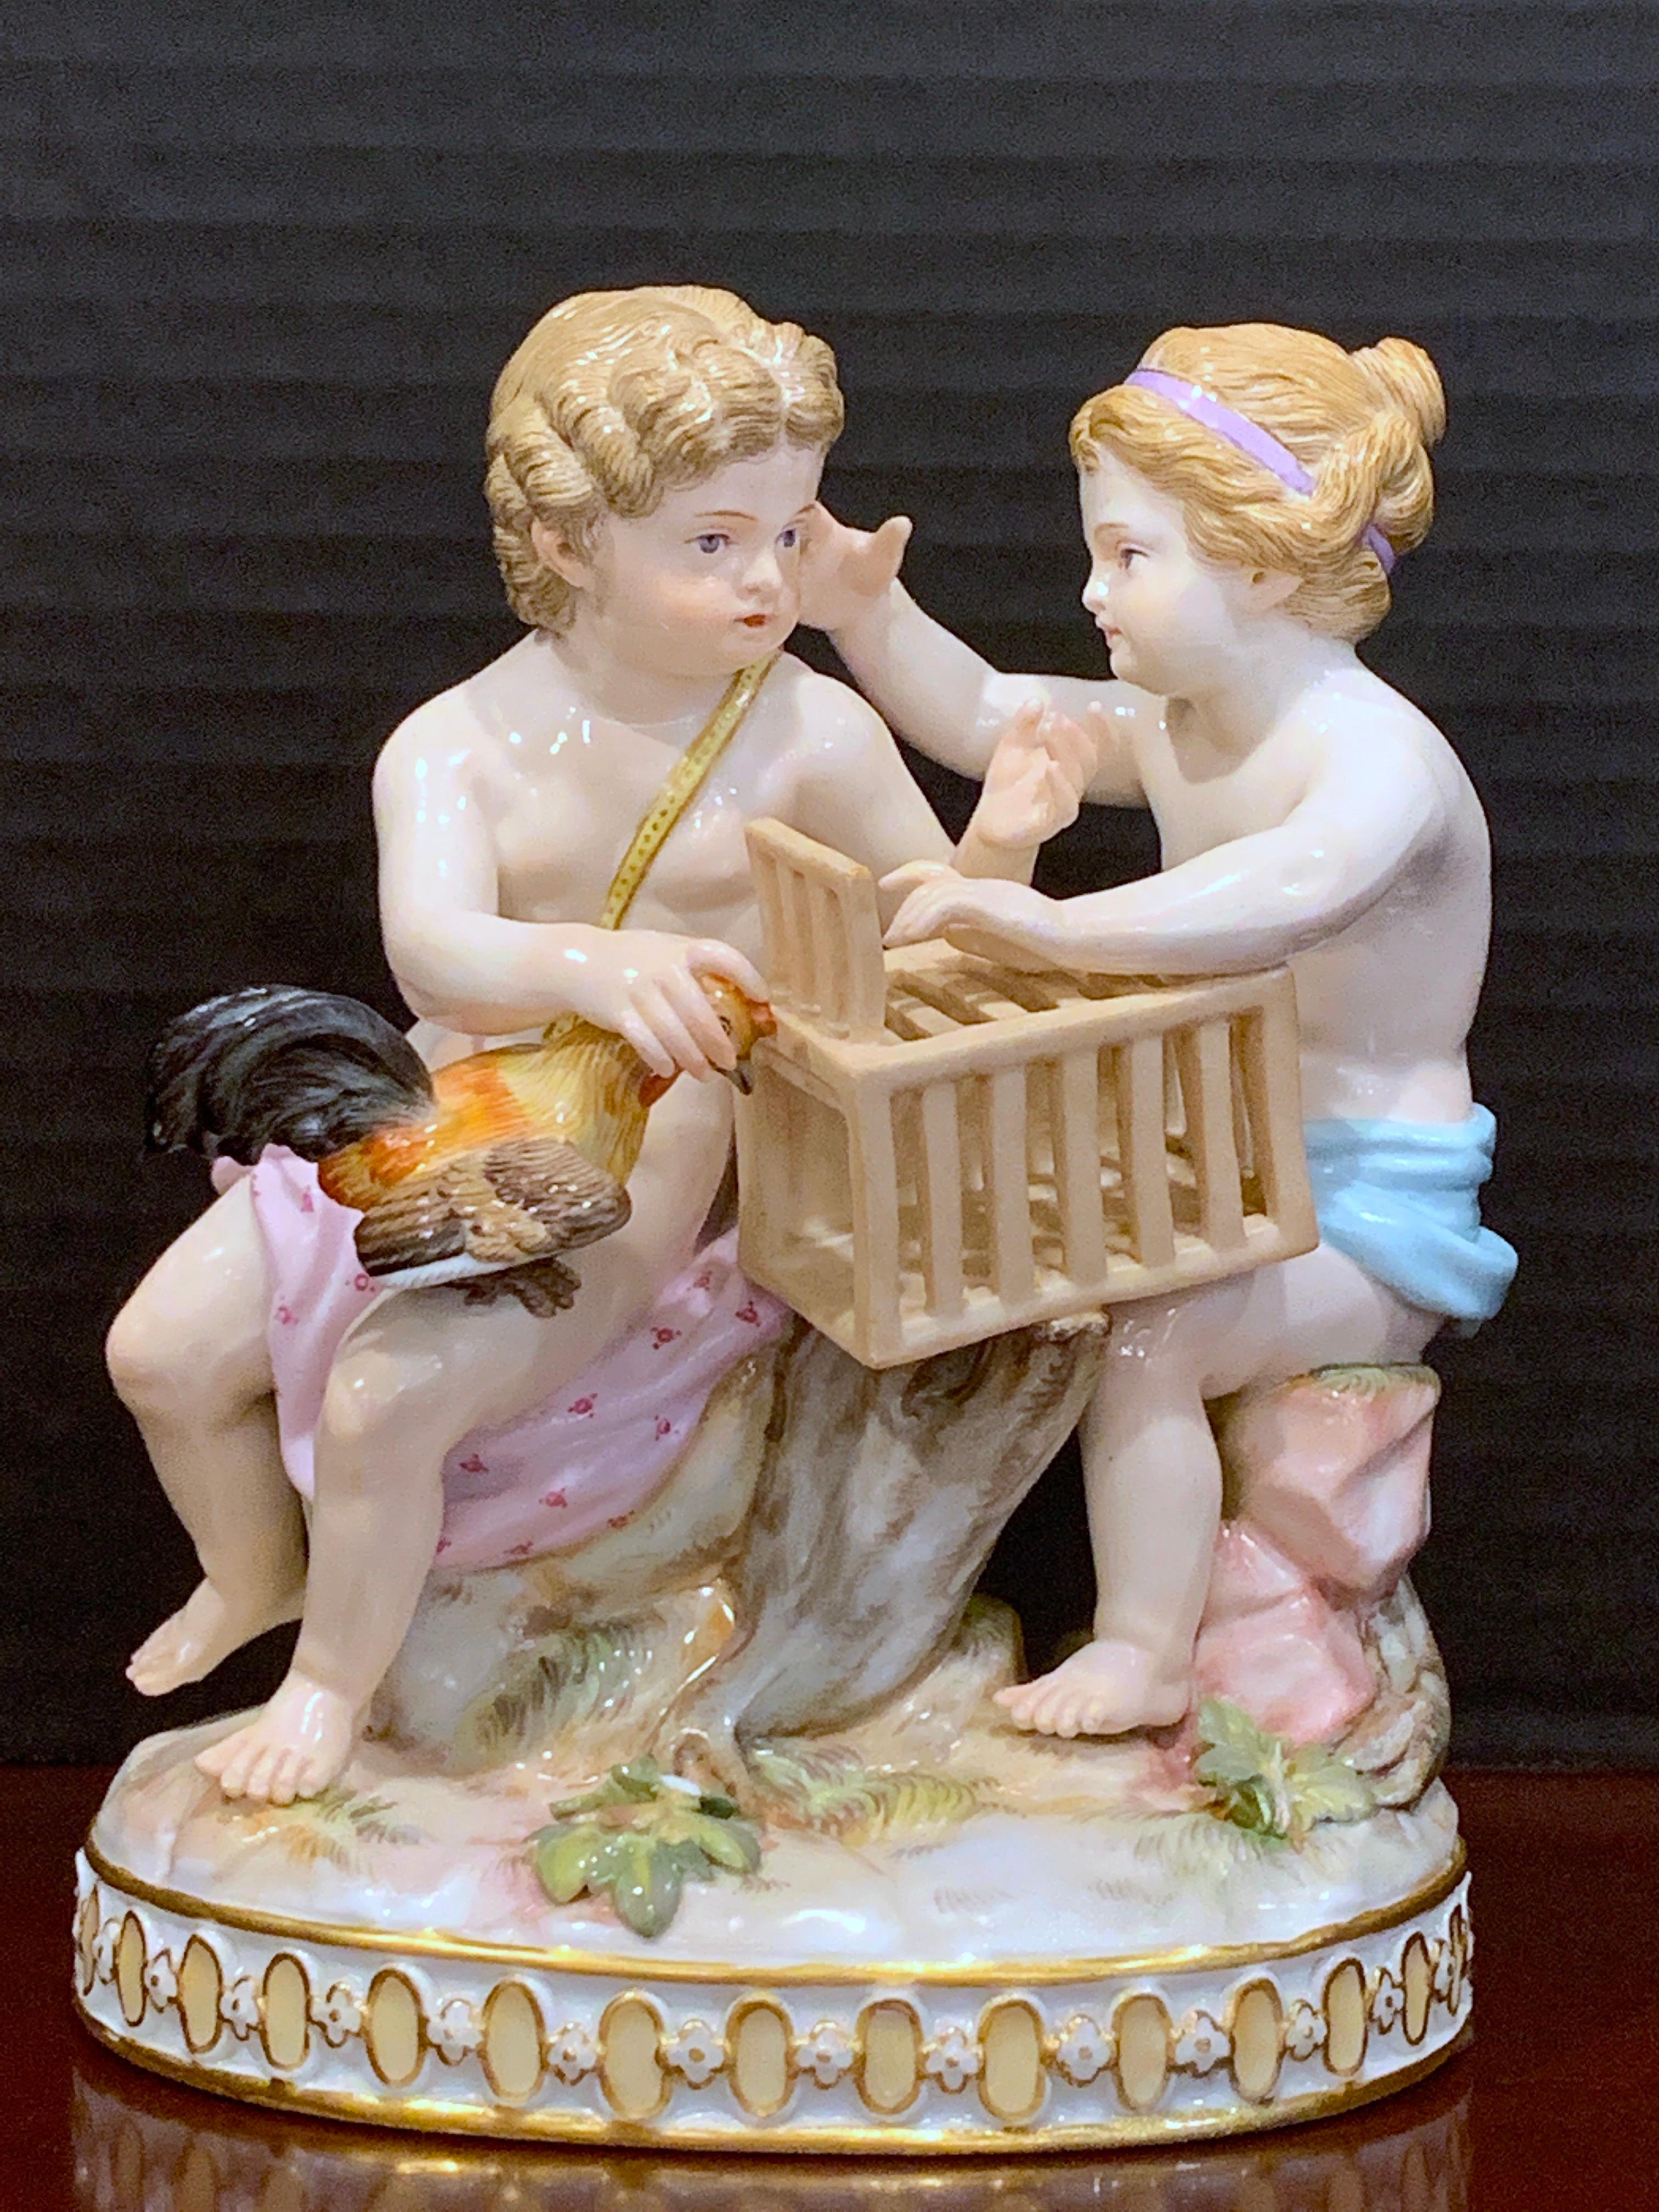 19th century Meissen grouping of two boys with rooster and cage, remarkable condition, all fingers and toes intact no major damage observed.